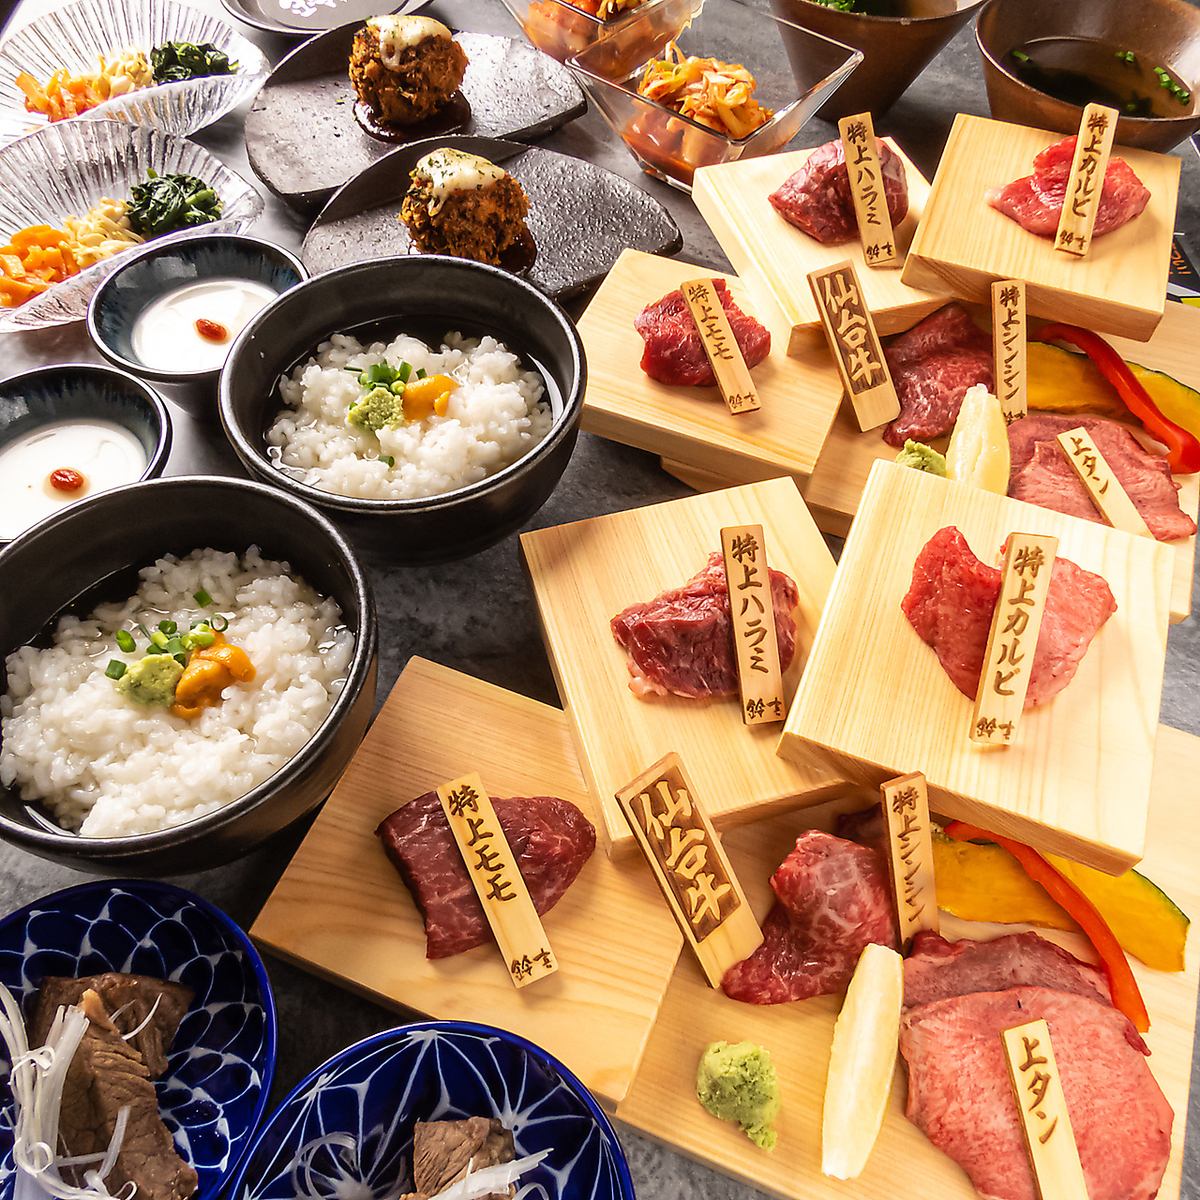 We also offer course menus starting from 6,000 yen that can be used for various occasions!